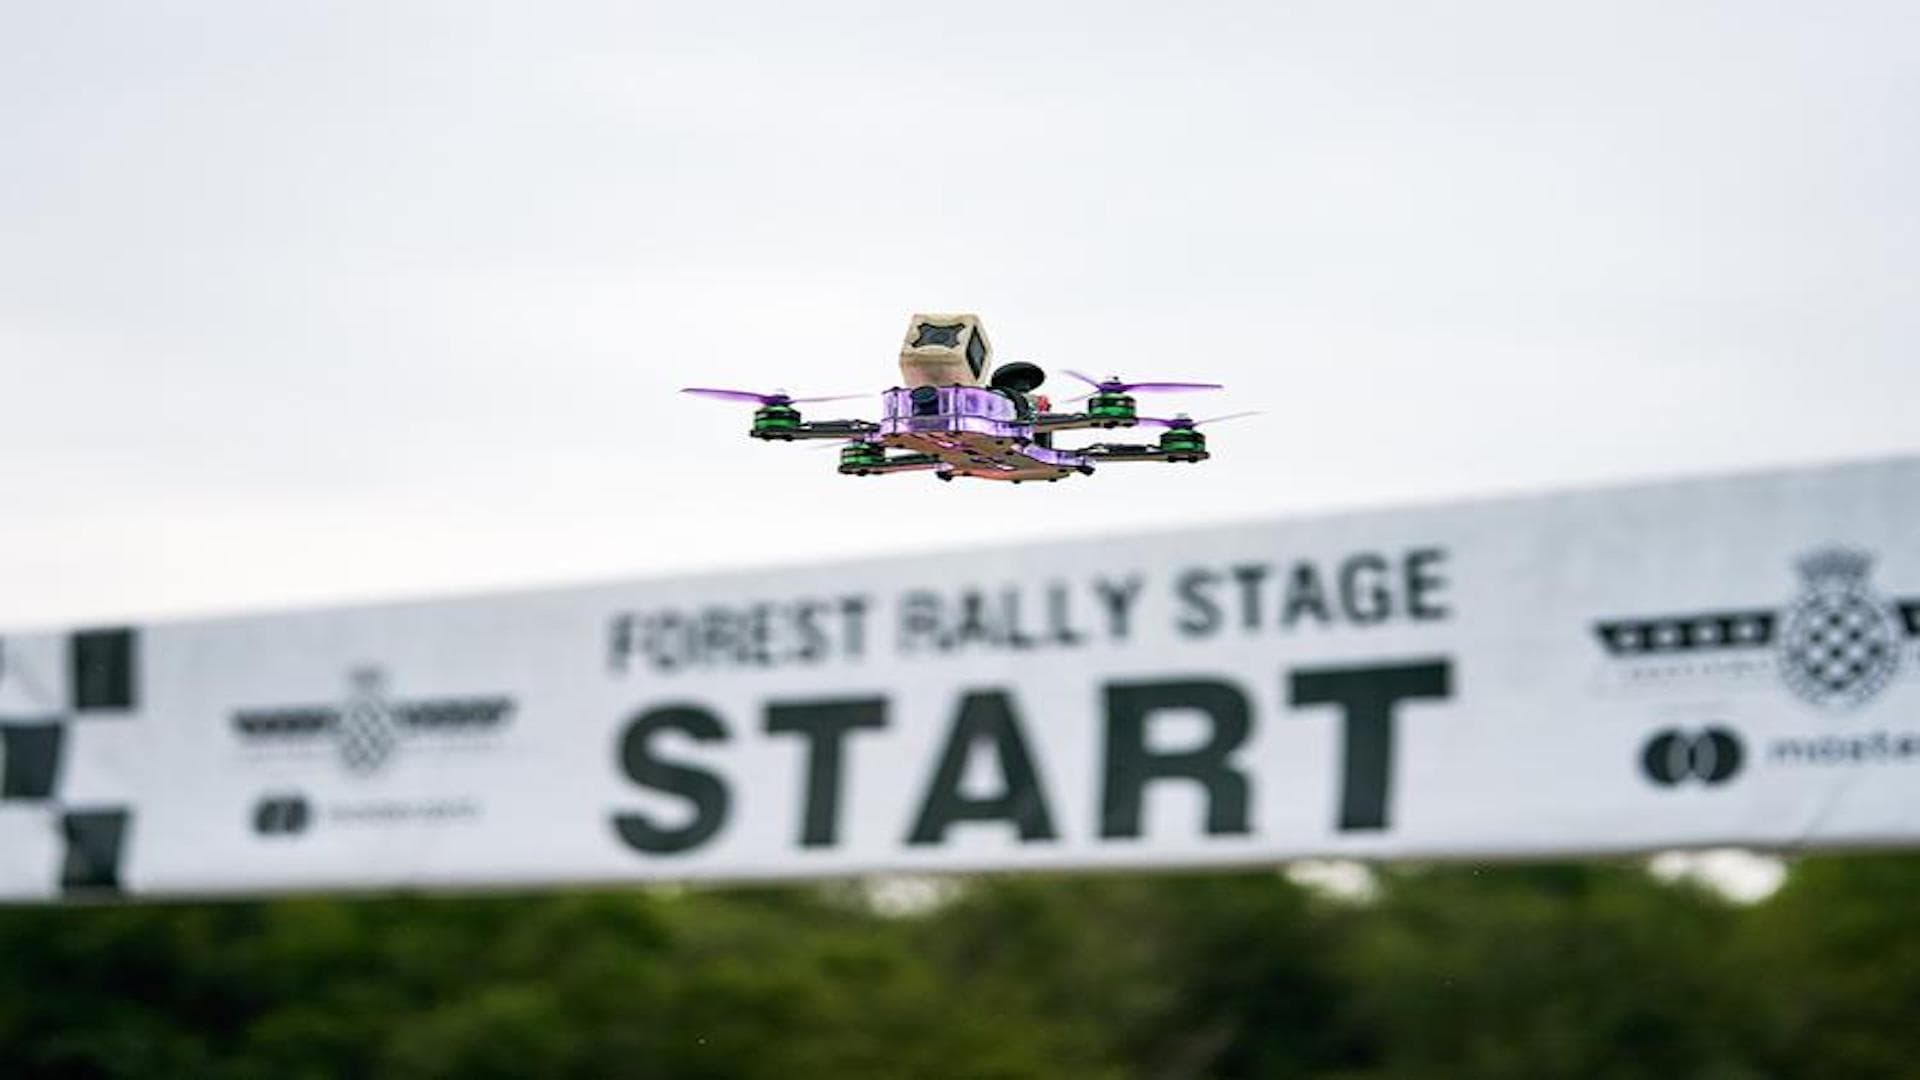 Goodwood Festival of Speed Includes Drone Racing to Inspire Youth